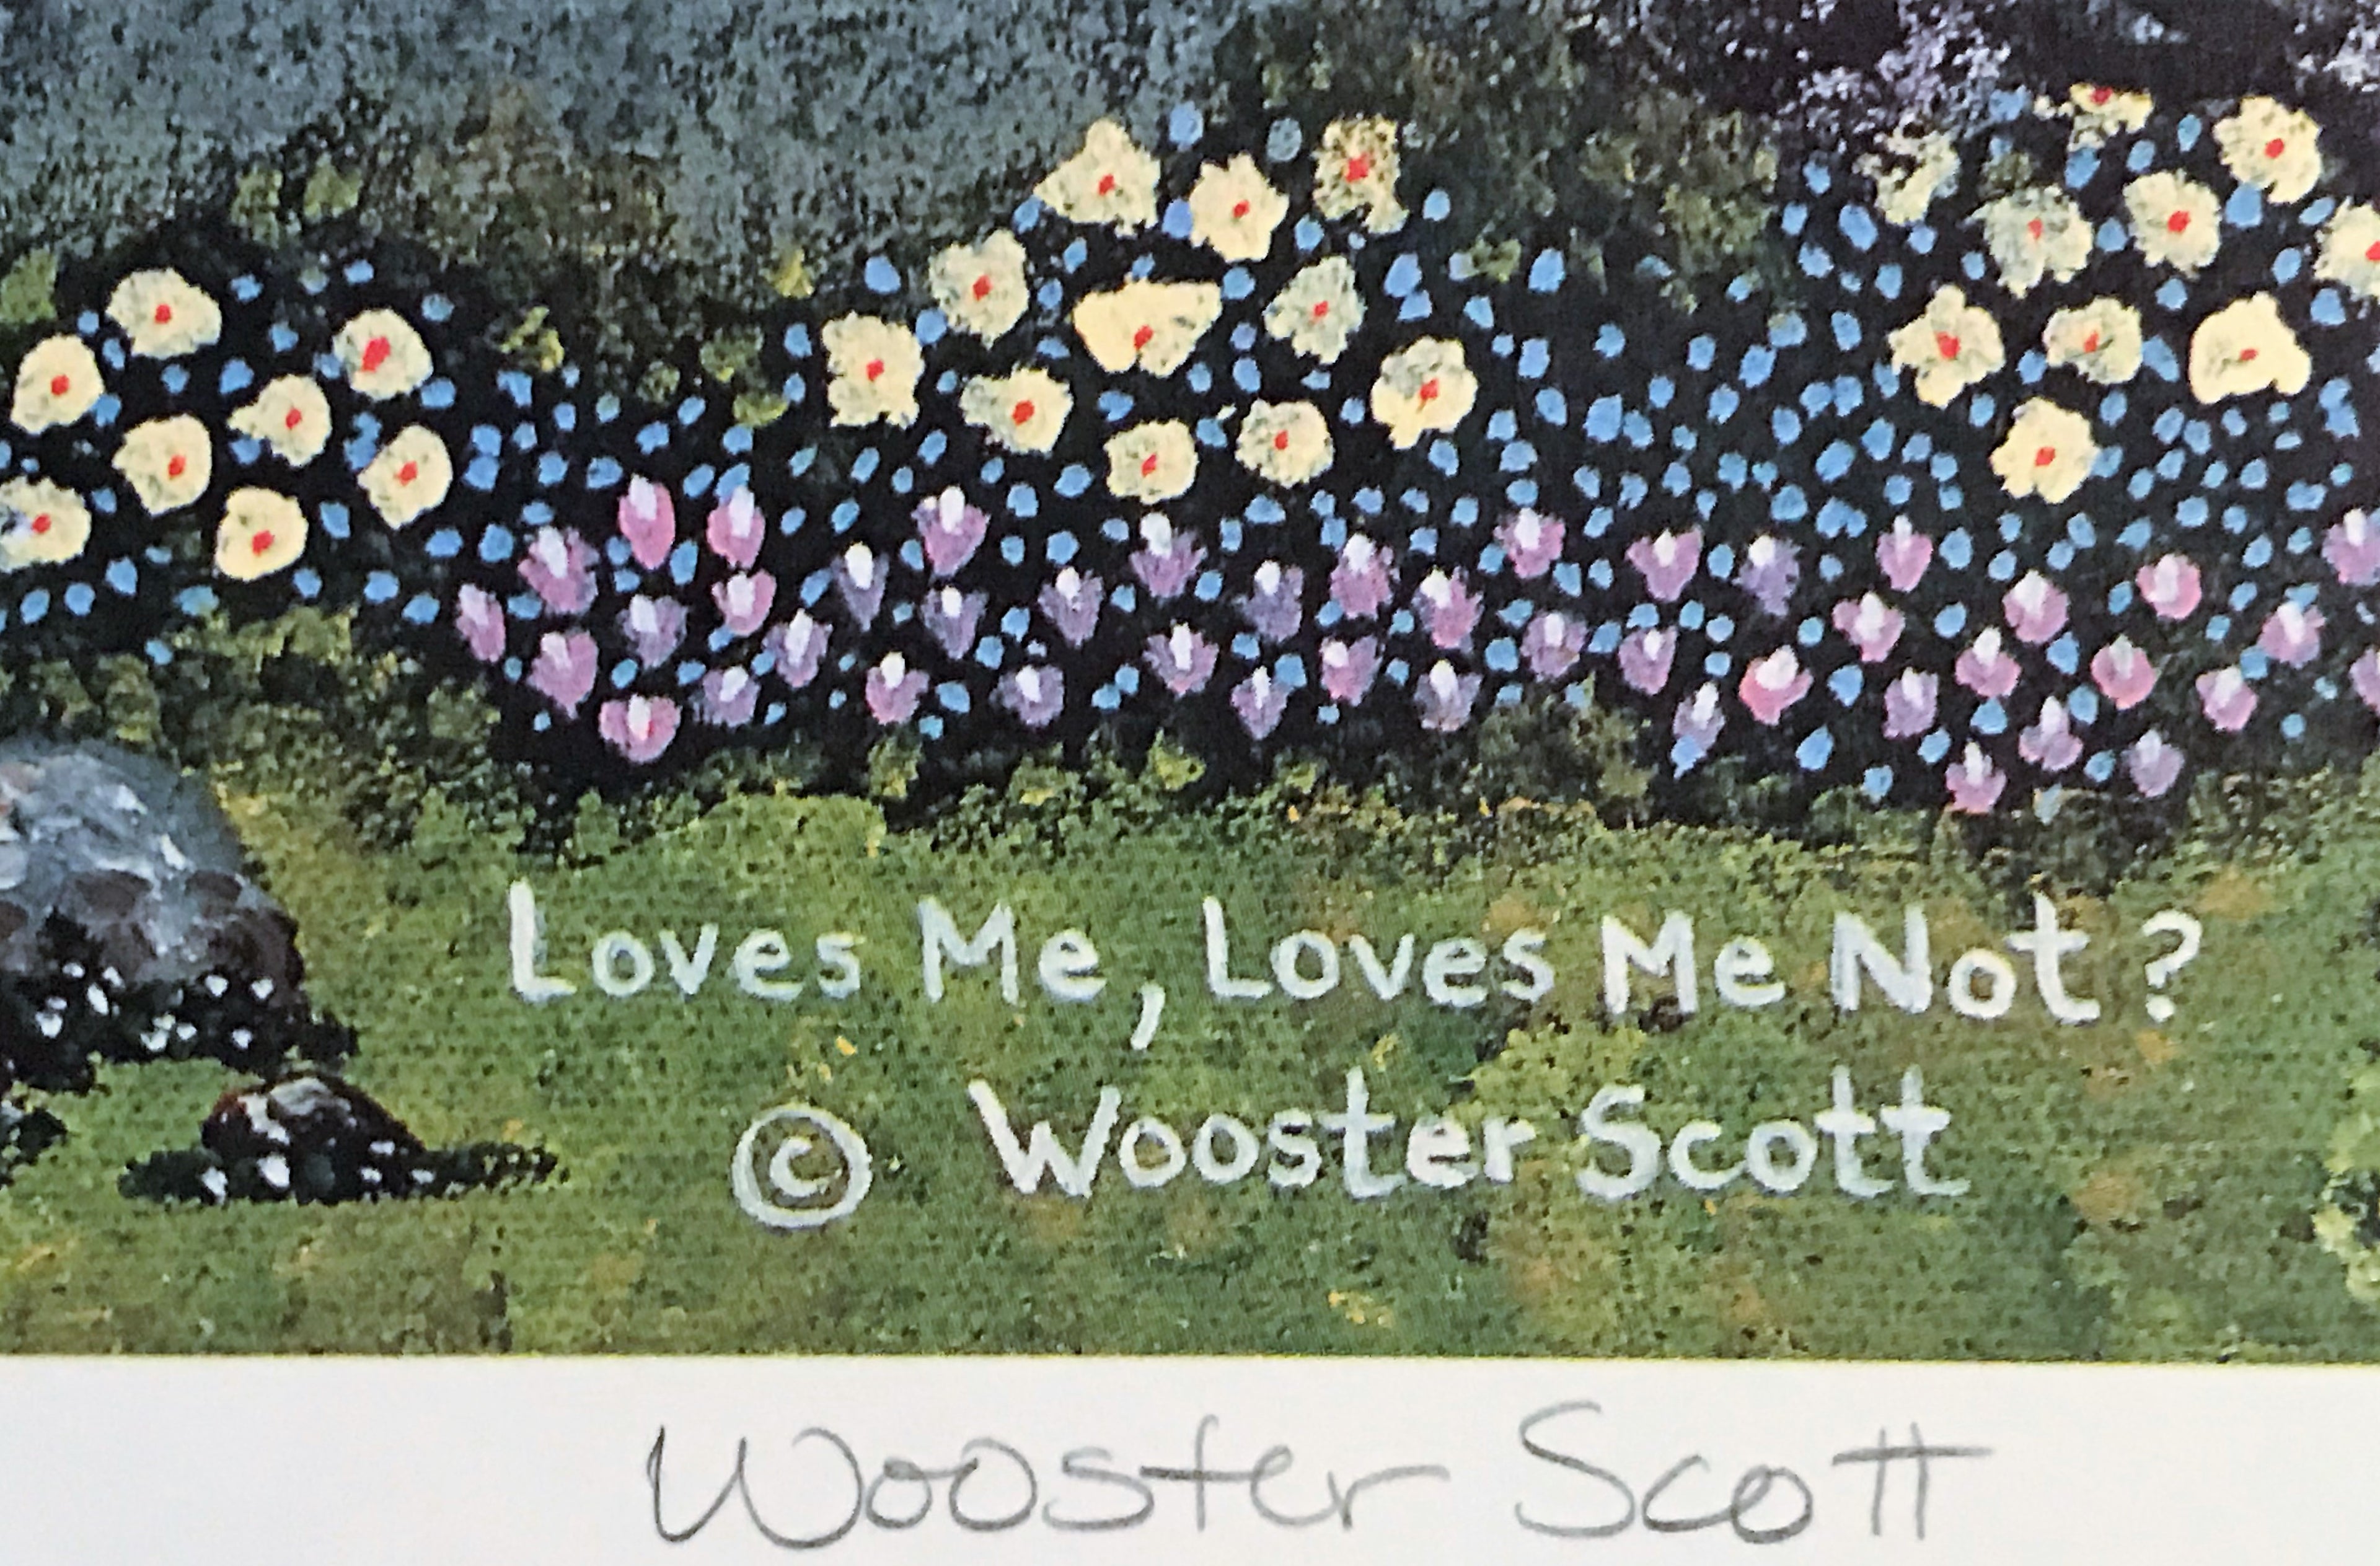 Loves Me Loves Me Not Jane Wooster Scott Lithograph Print Artist Hand Signed and Numbered